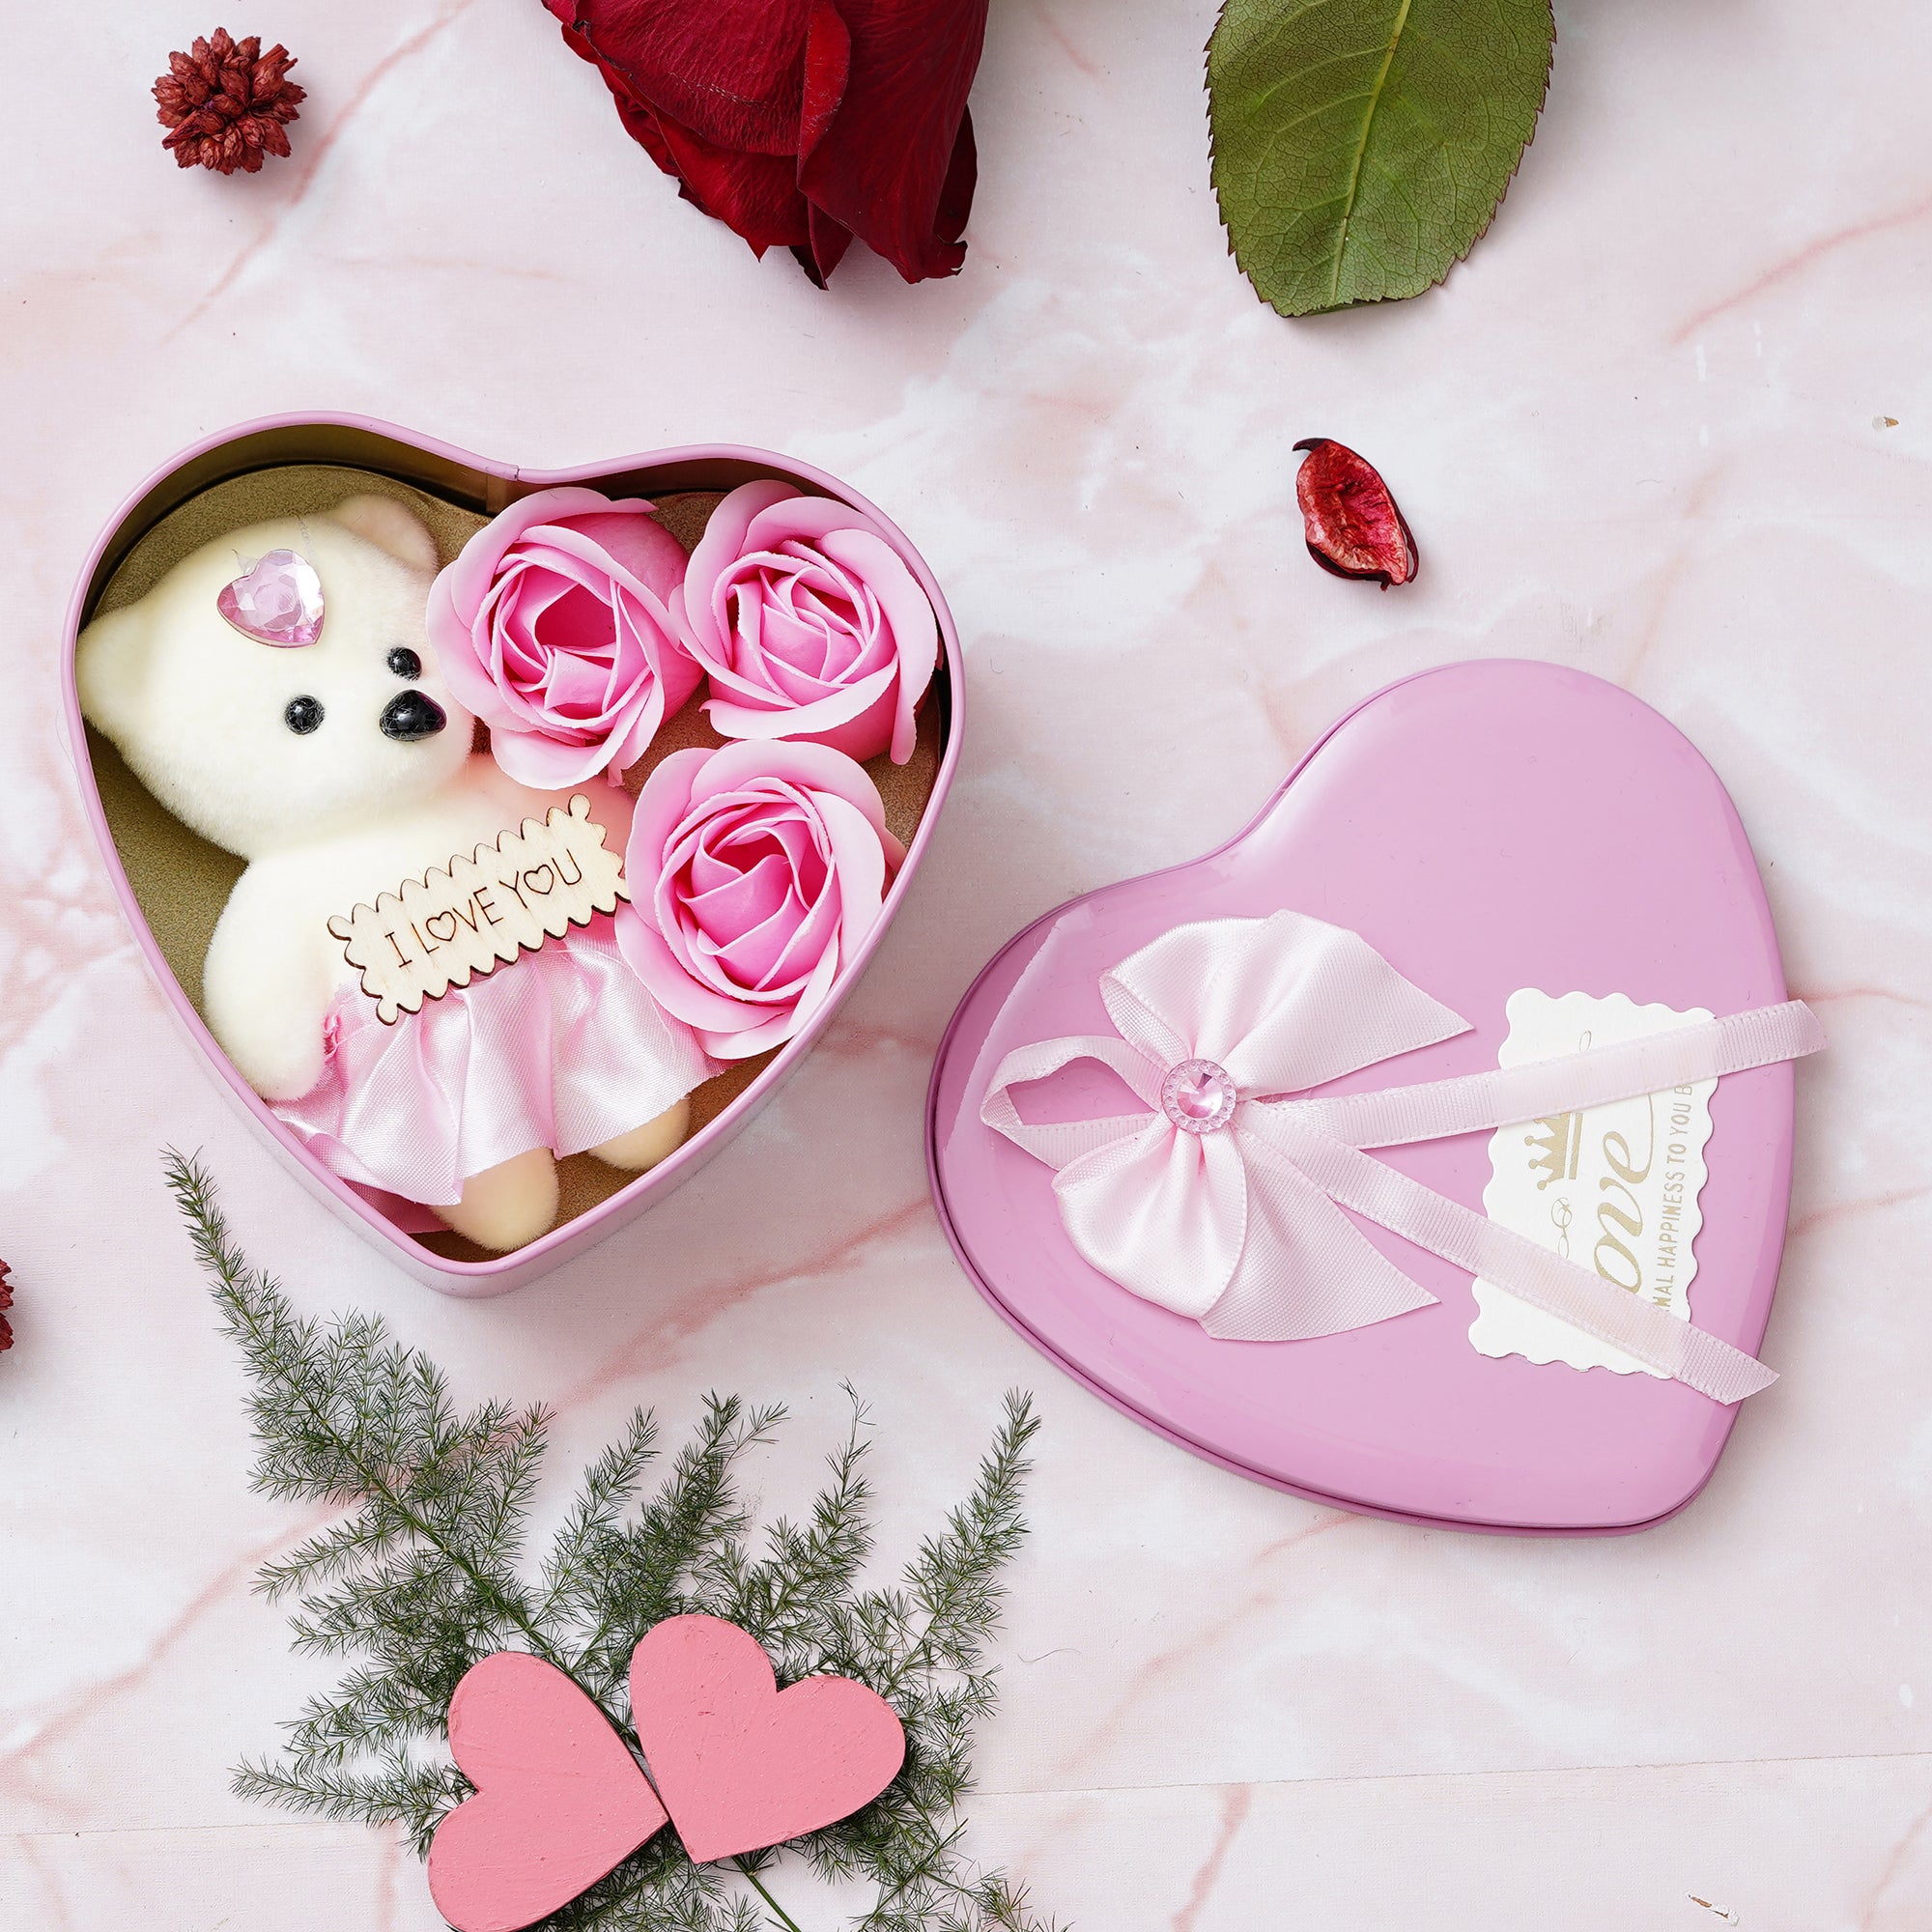 Valentine Combo of Card, Red and White Heart Hugging Each Other Gift Set, Pink Heart Shaped Gift Box with Teddy and Roses 5